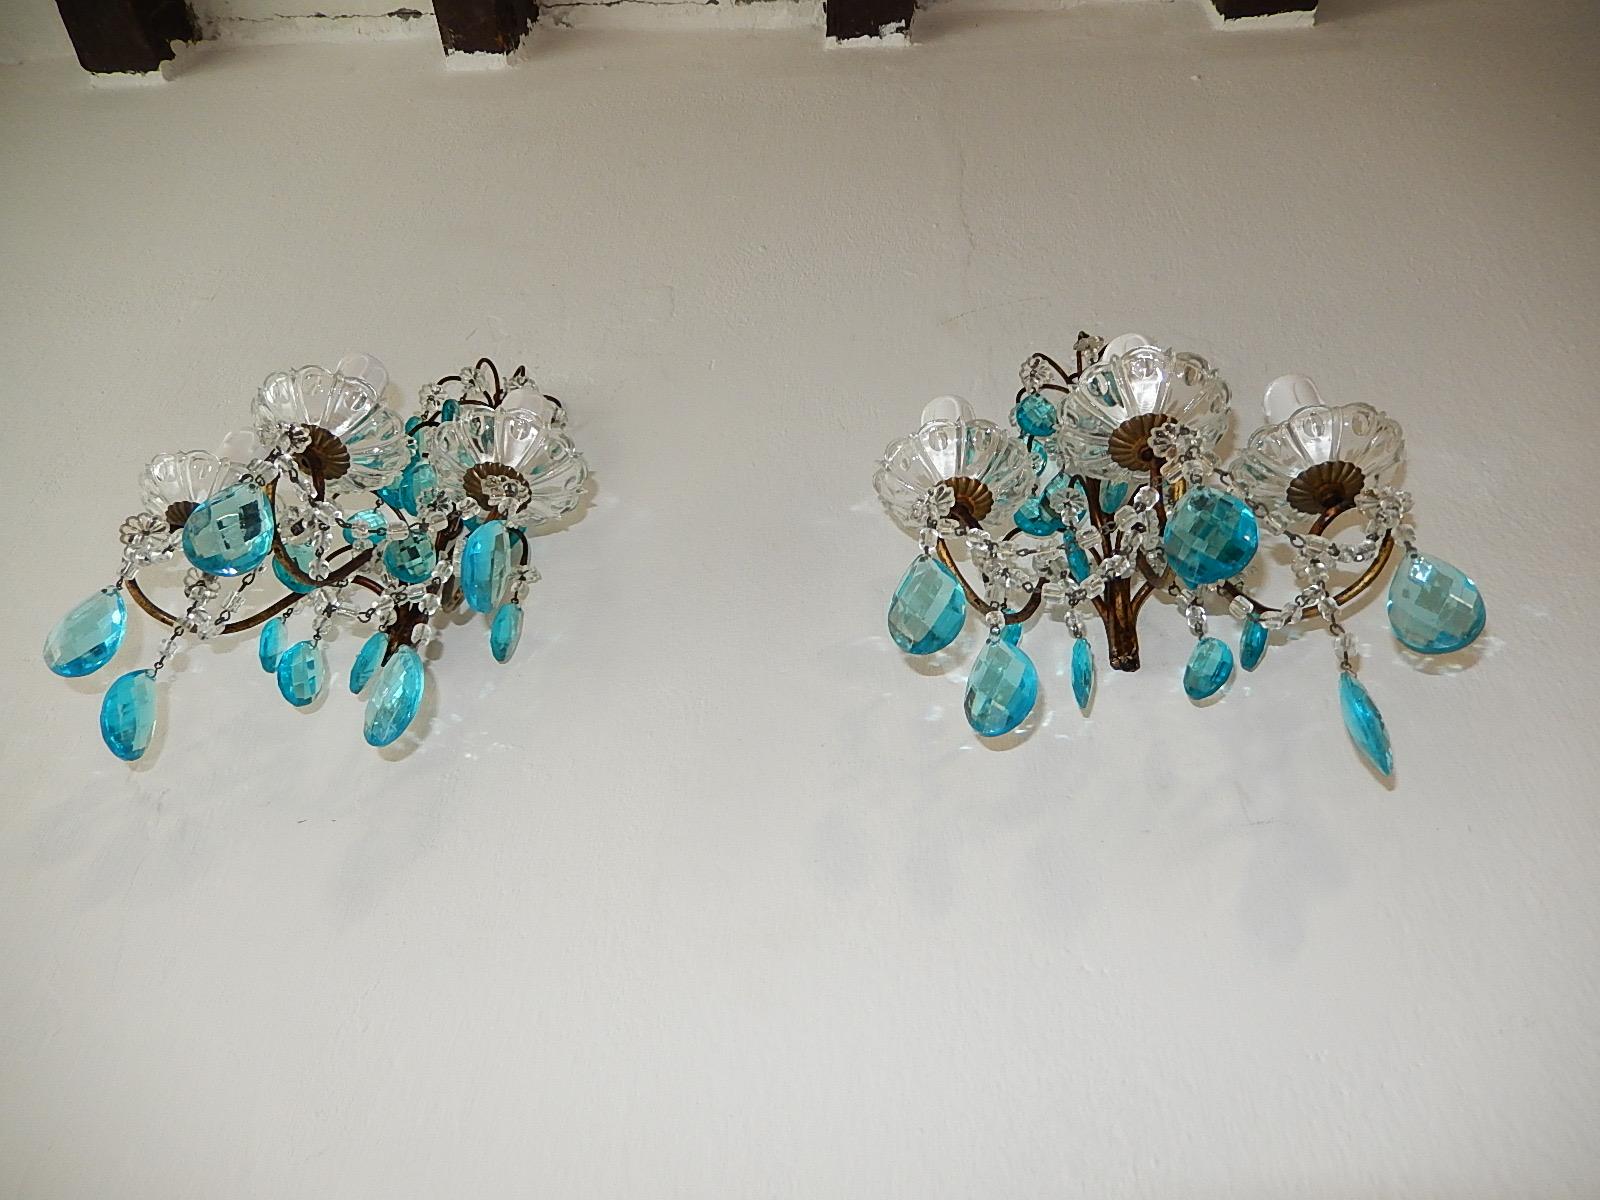 1920 French Aqua Blue Crystal Prisms and Swags Sconces For Sale 5